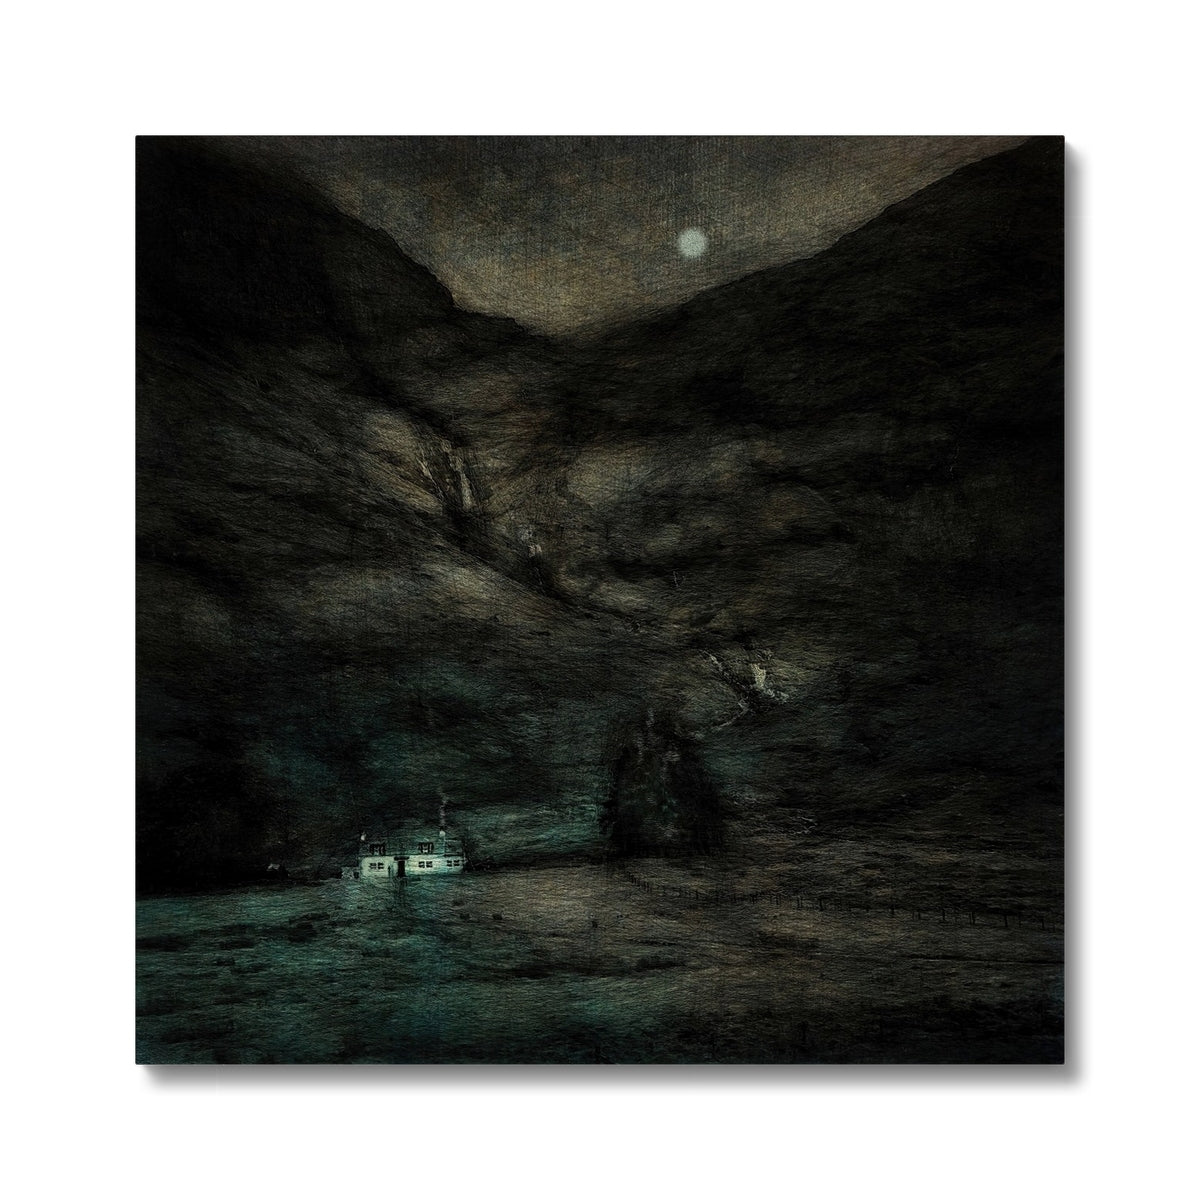 Glencoe Cottage Moonlight Painting | Canvas From Scotland-Contemporary Stretched Canvas Prints-Glencoe Art Gallery-24"x24"-Paintings, Prints, Homeware, Art Gifts From Scotland By Scottish Artist Kevin Hunter